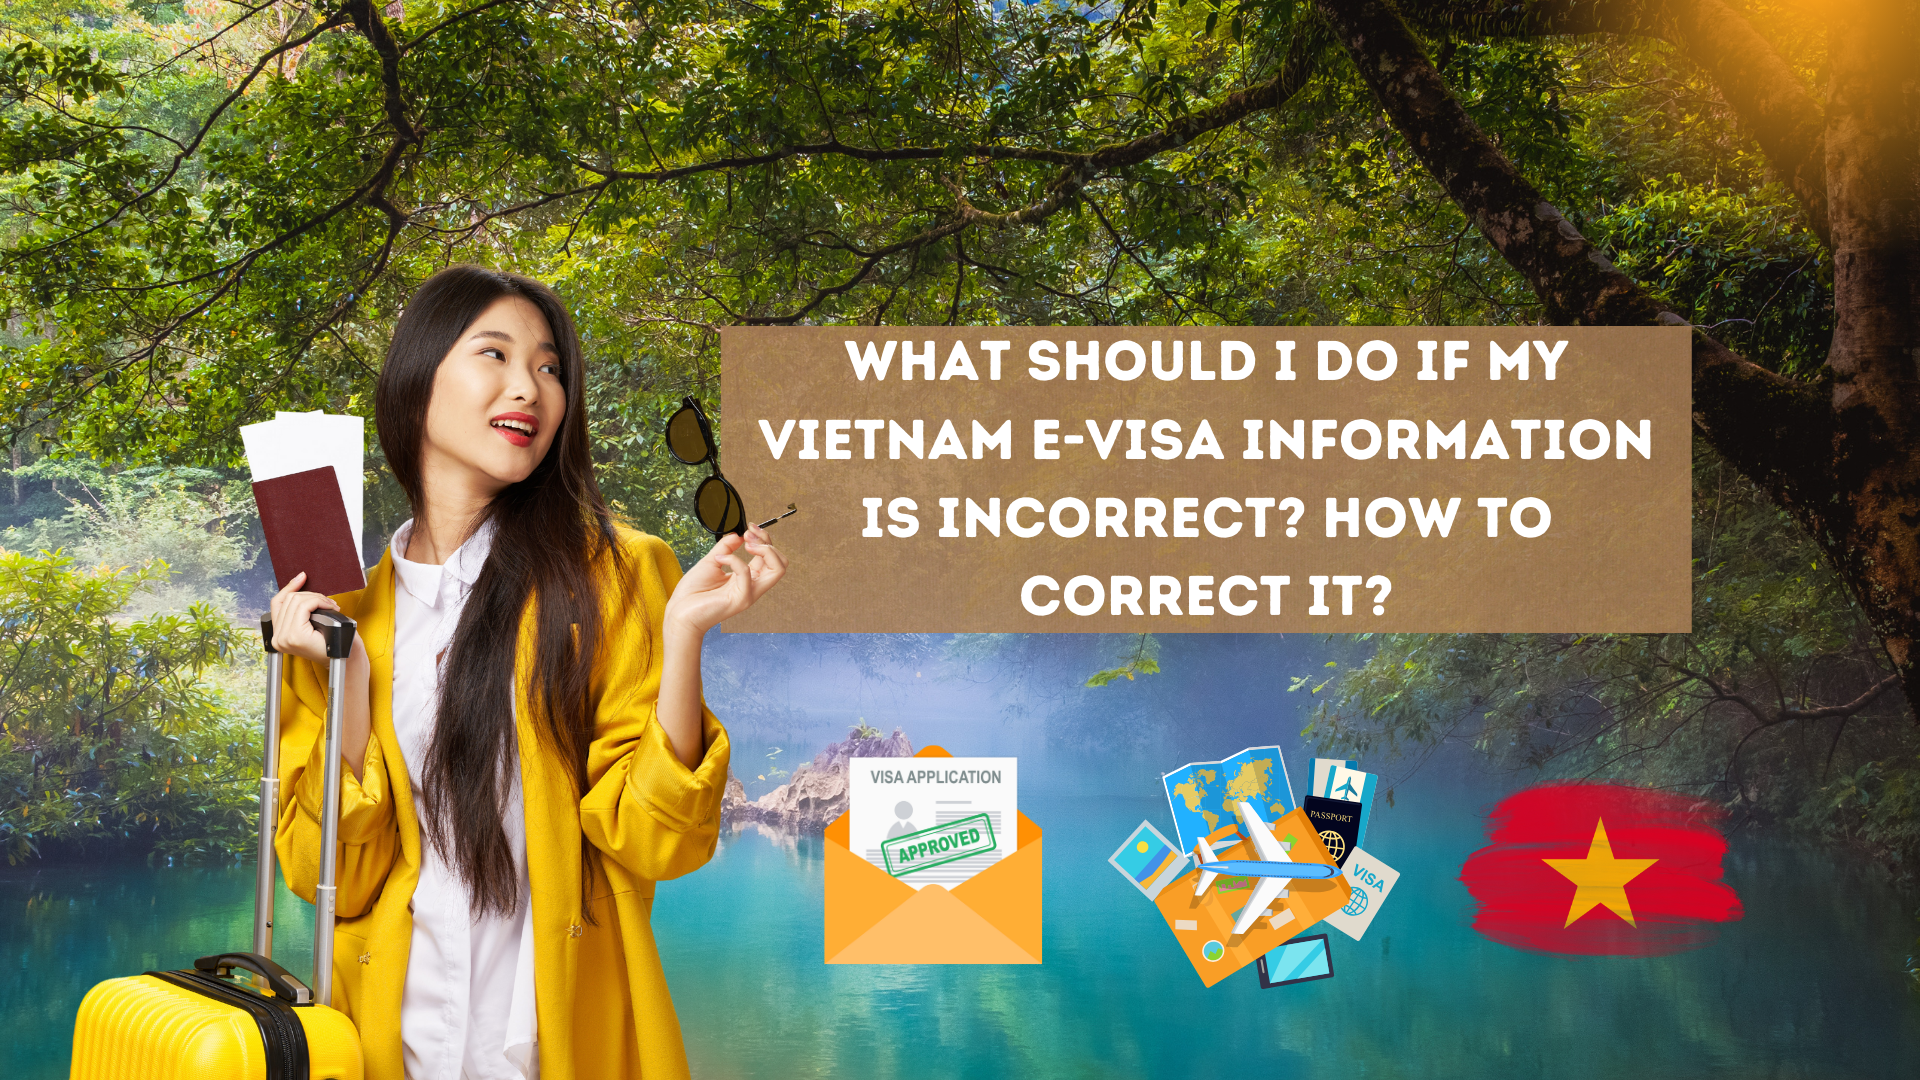 What should I do if my Vietnam E-visa information is incorrect? How to correct it?